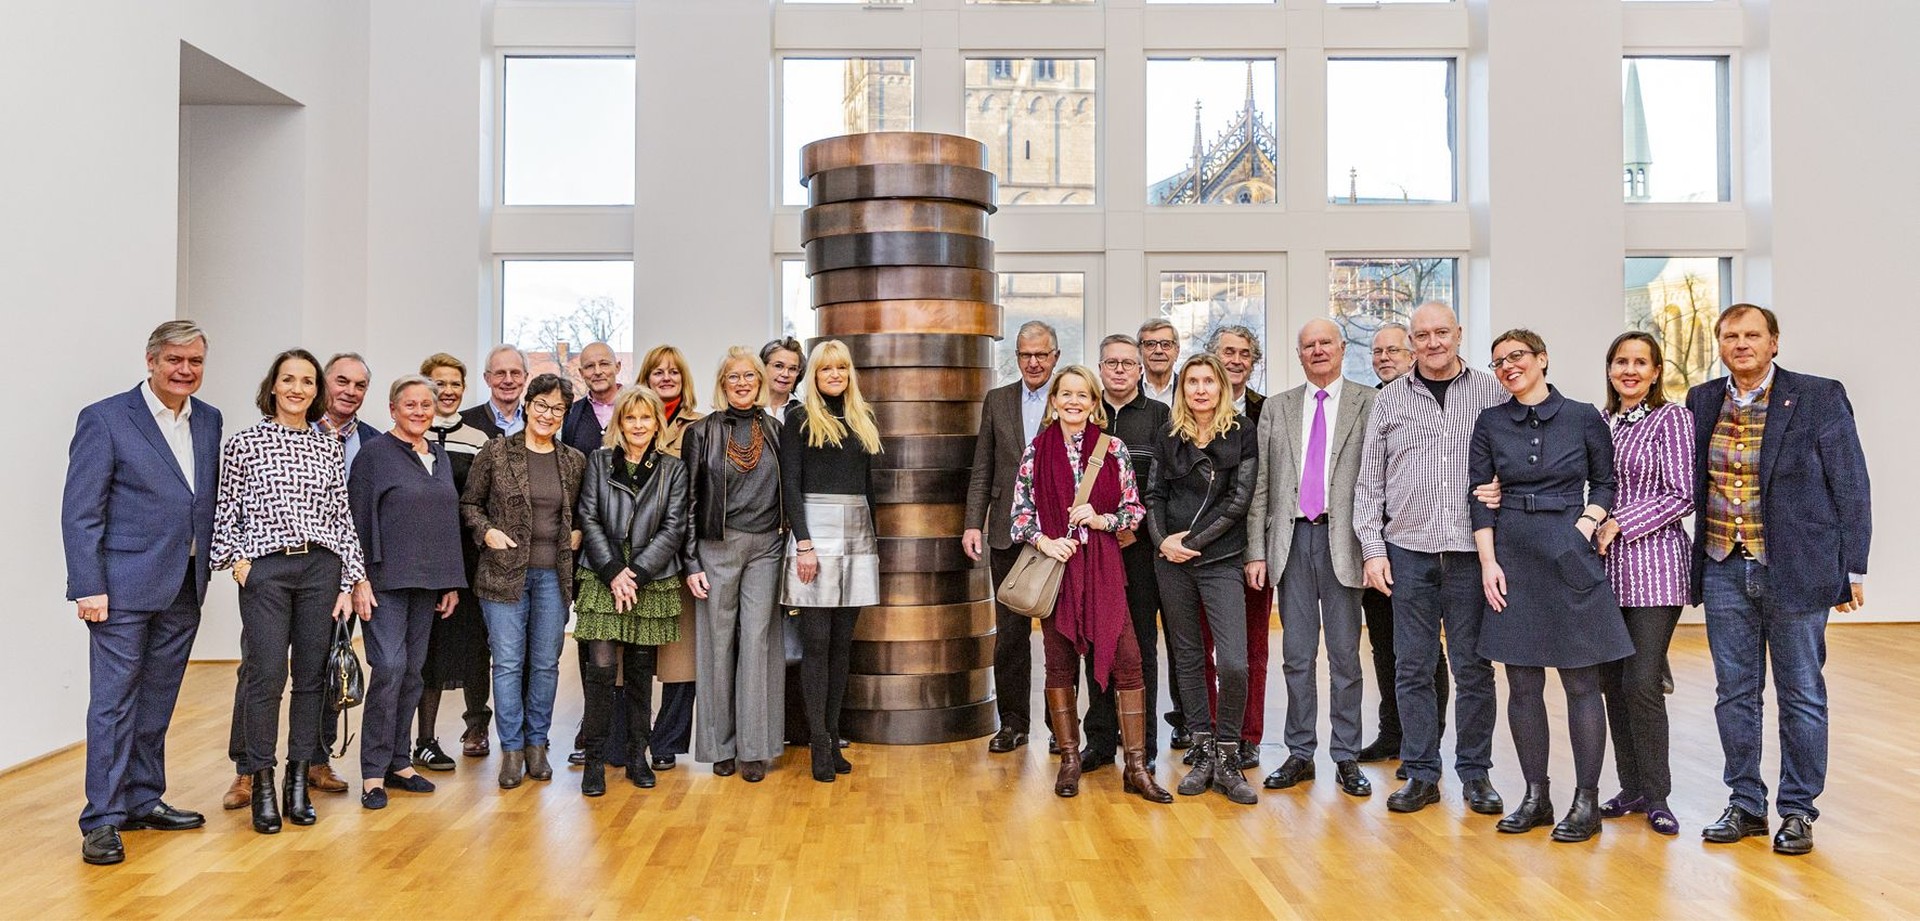 The members of the kunst³ Foundation. Photo: LWL/Neander